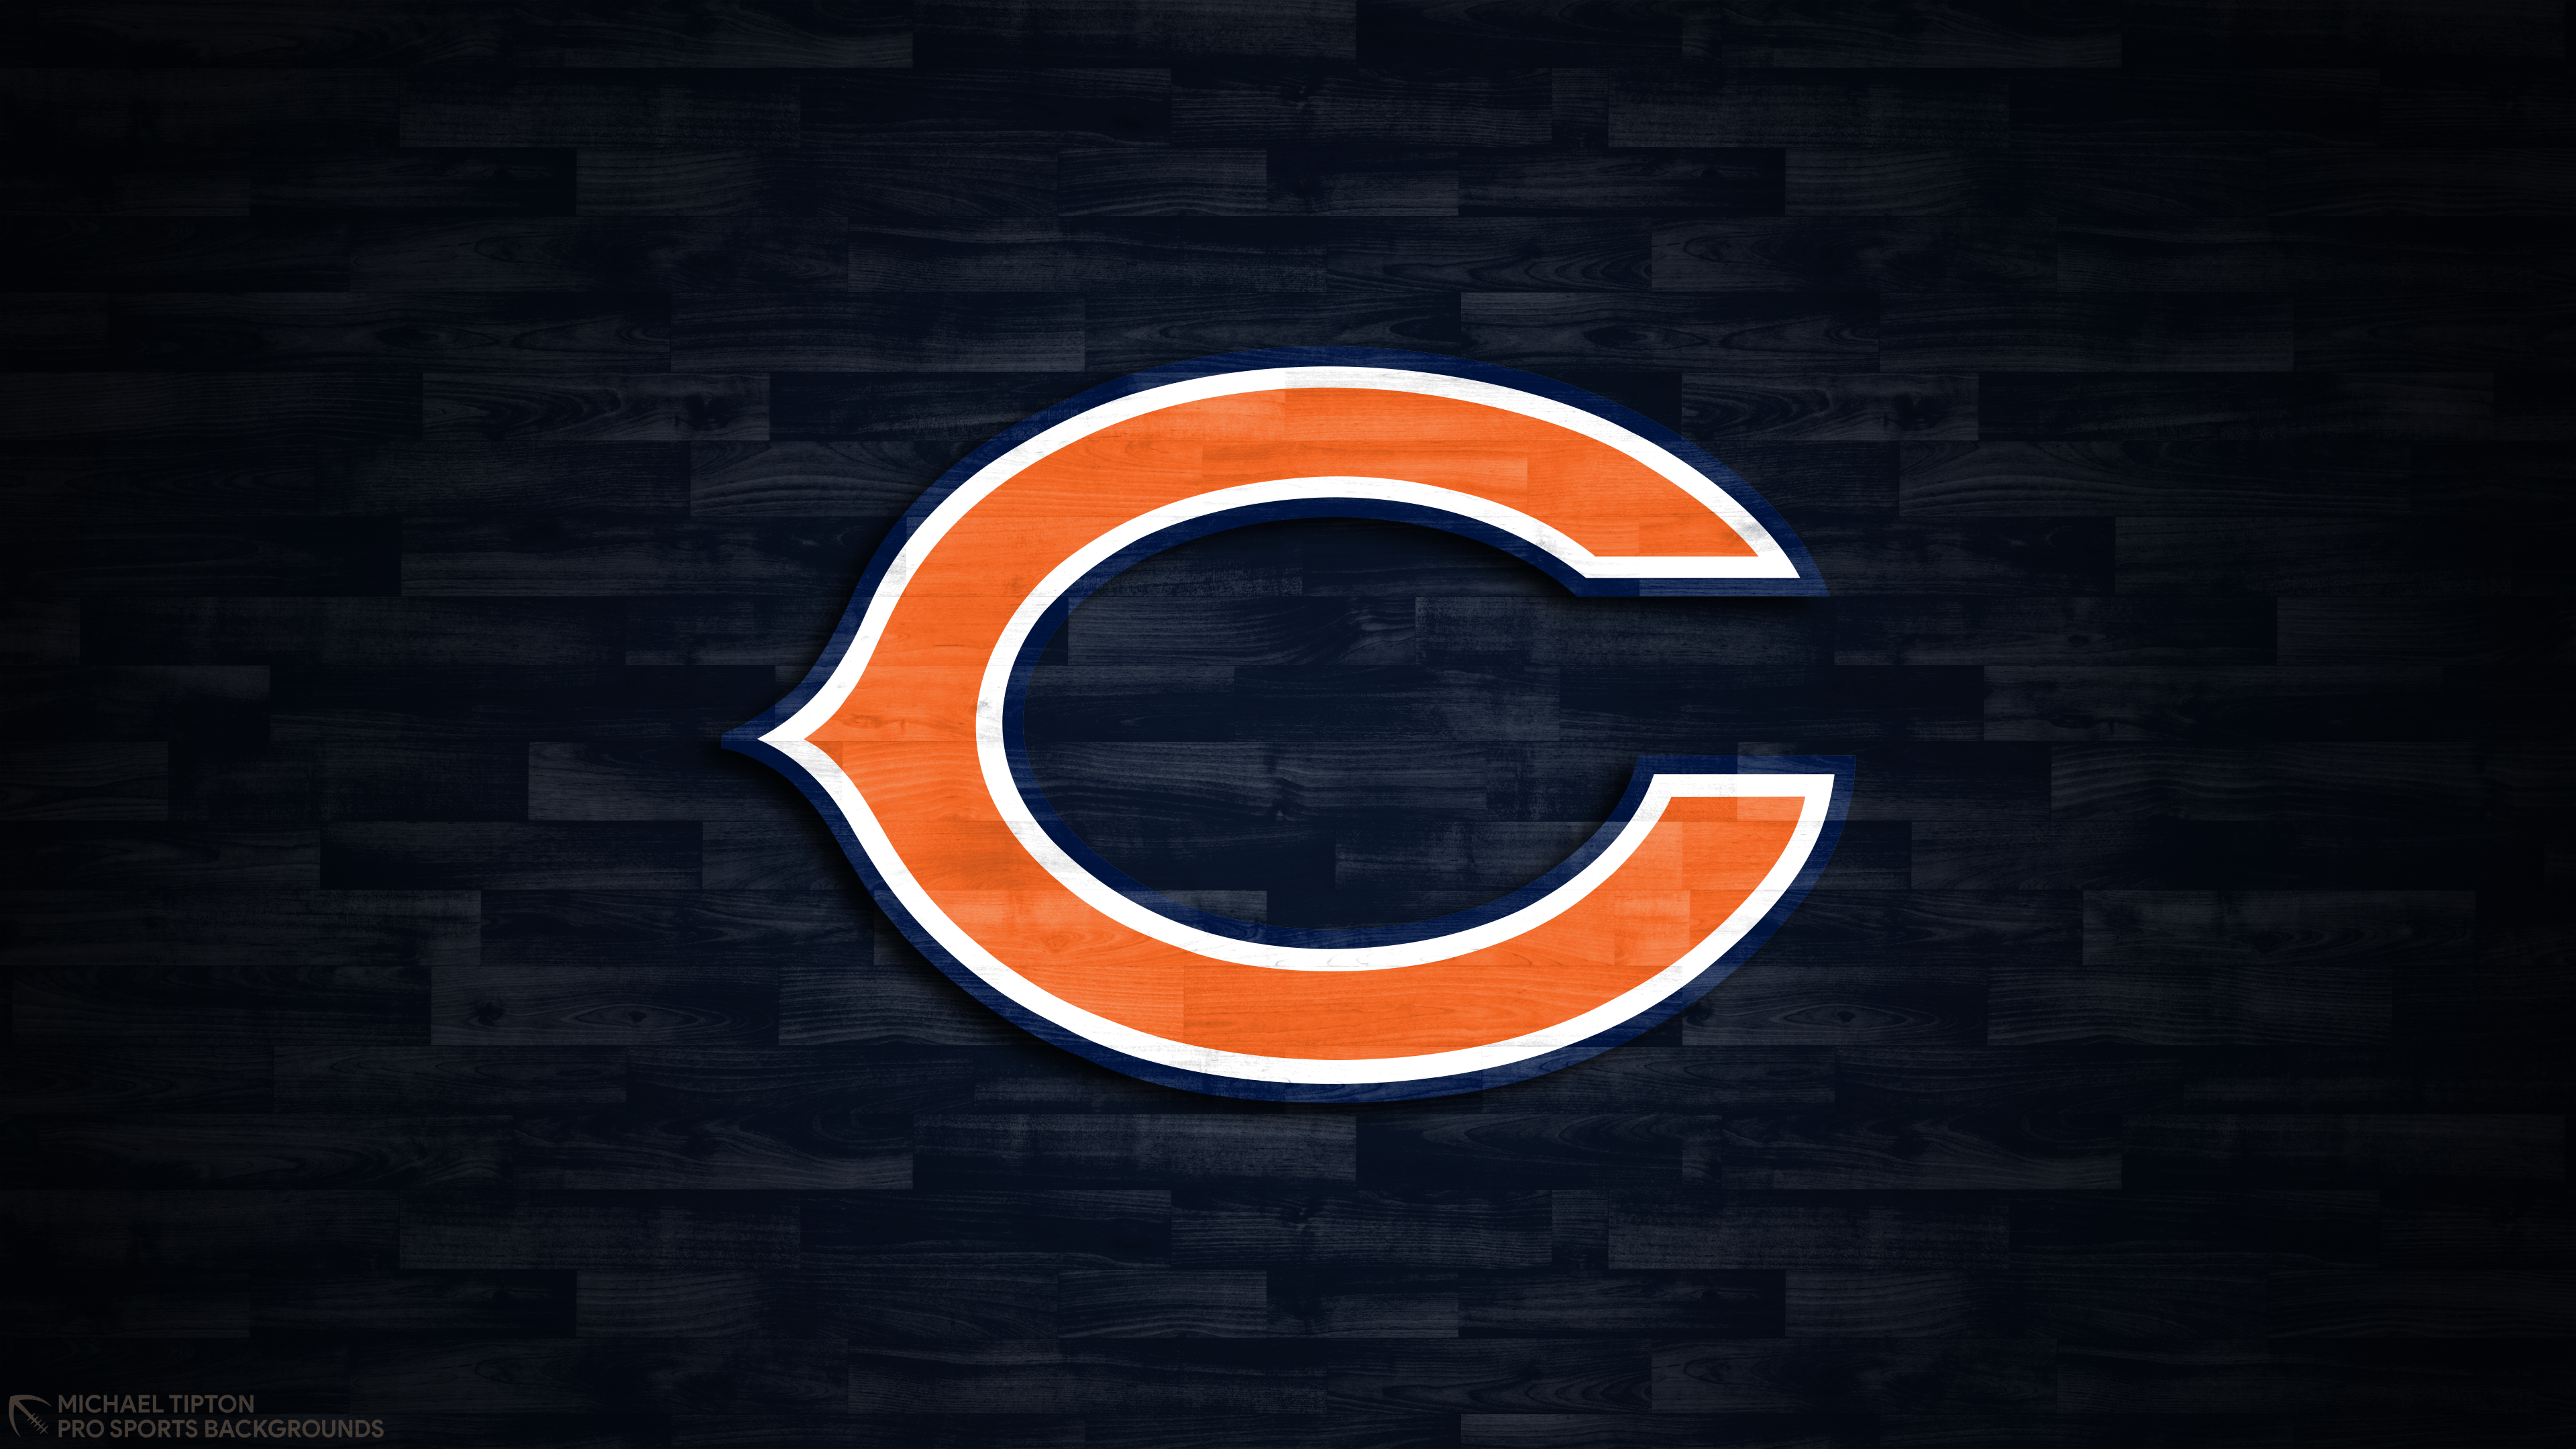 Chicago Bears Wallpaper. Pro Sports Background